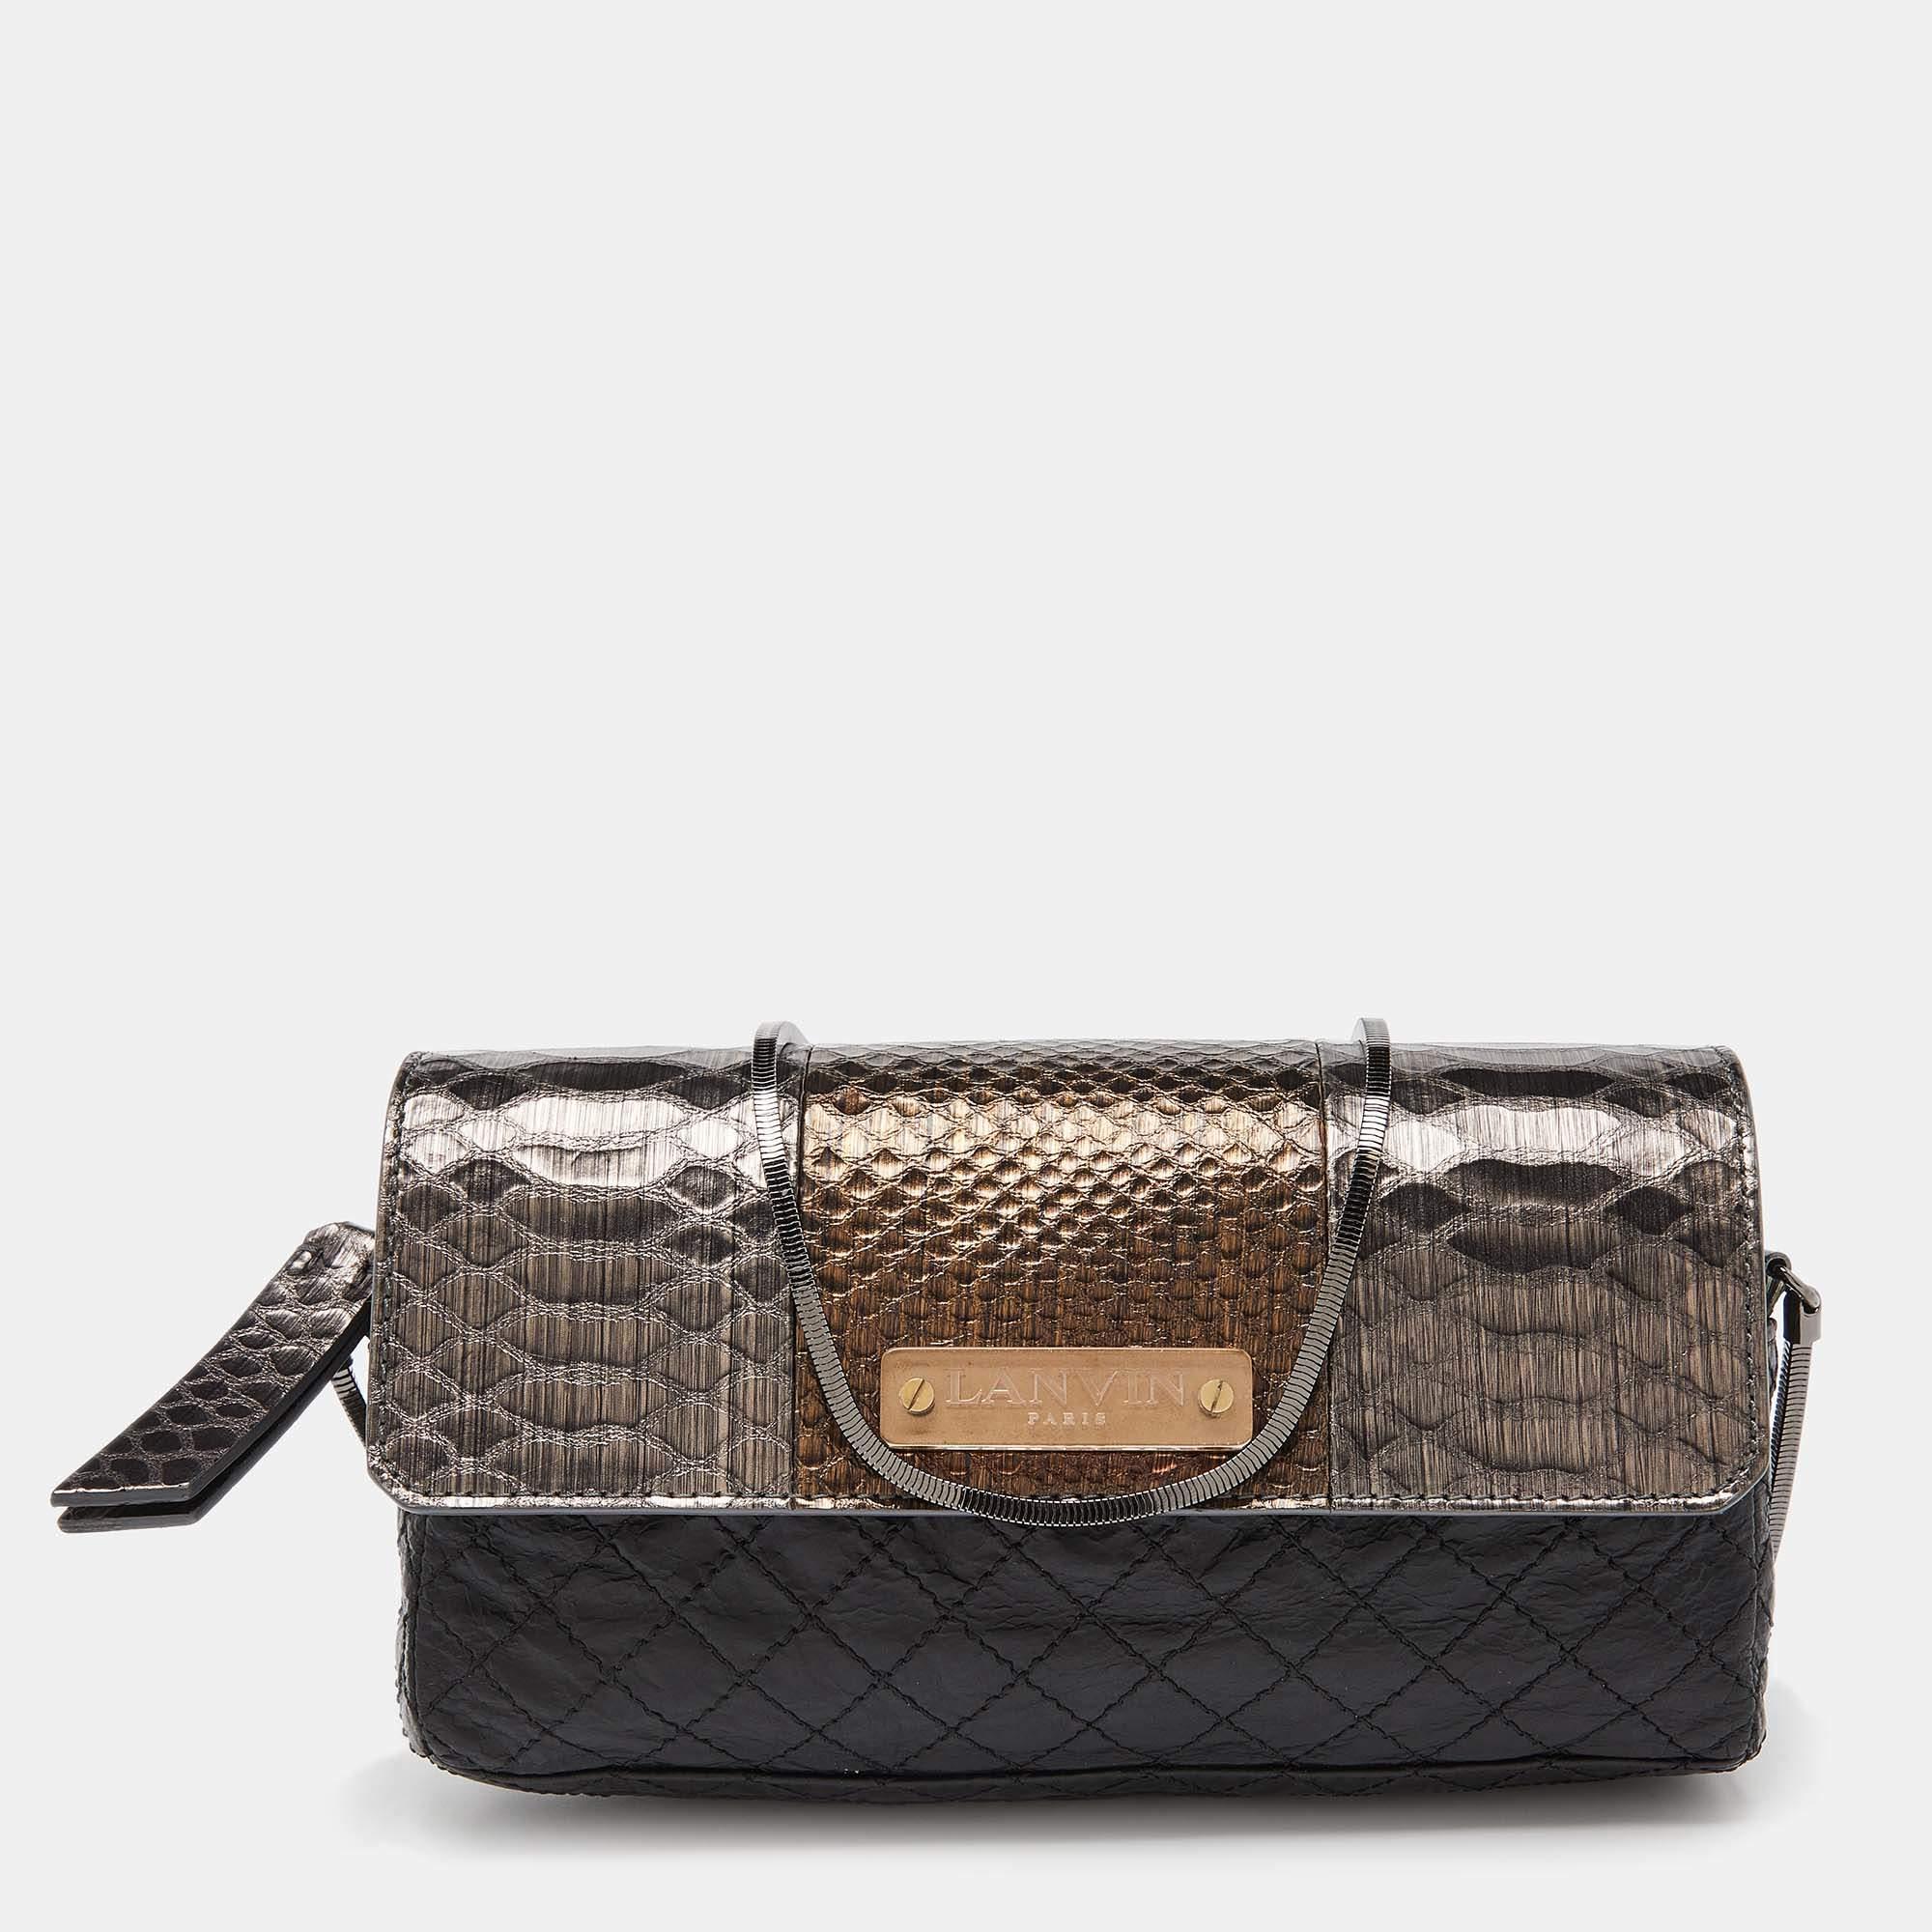 Lanvin Black/Gold Quilted Leather and Python Embossed Leather Flap Crossbody Bag In Good Condition For Sale In Dubai, Al Qouz 2